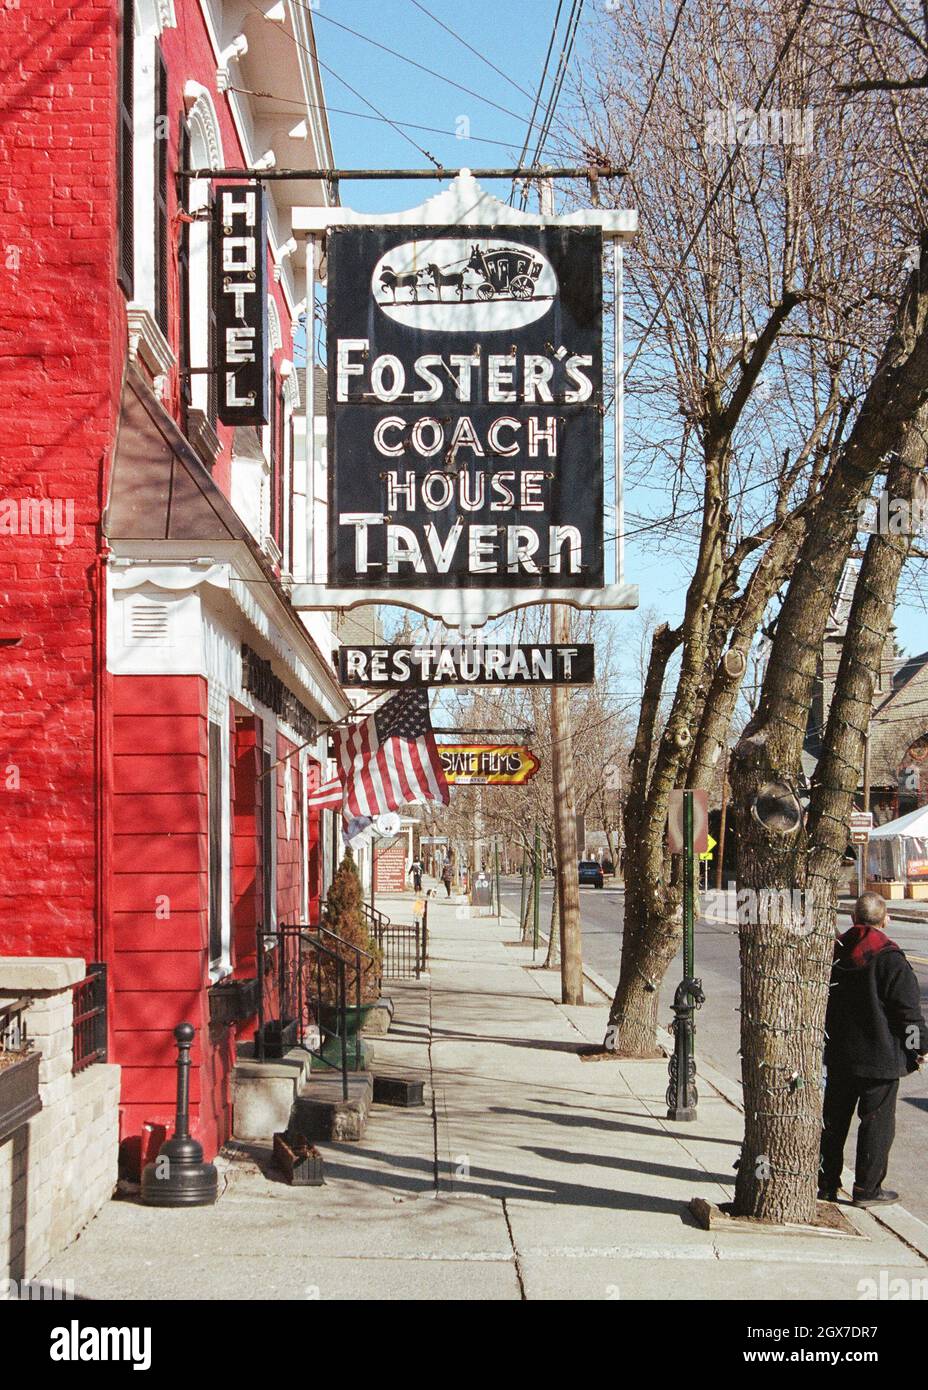 Fosters Coach House Tavern sign, in Rhinebeck, New York Stock Photo - Alamy